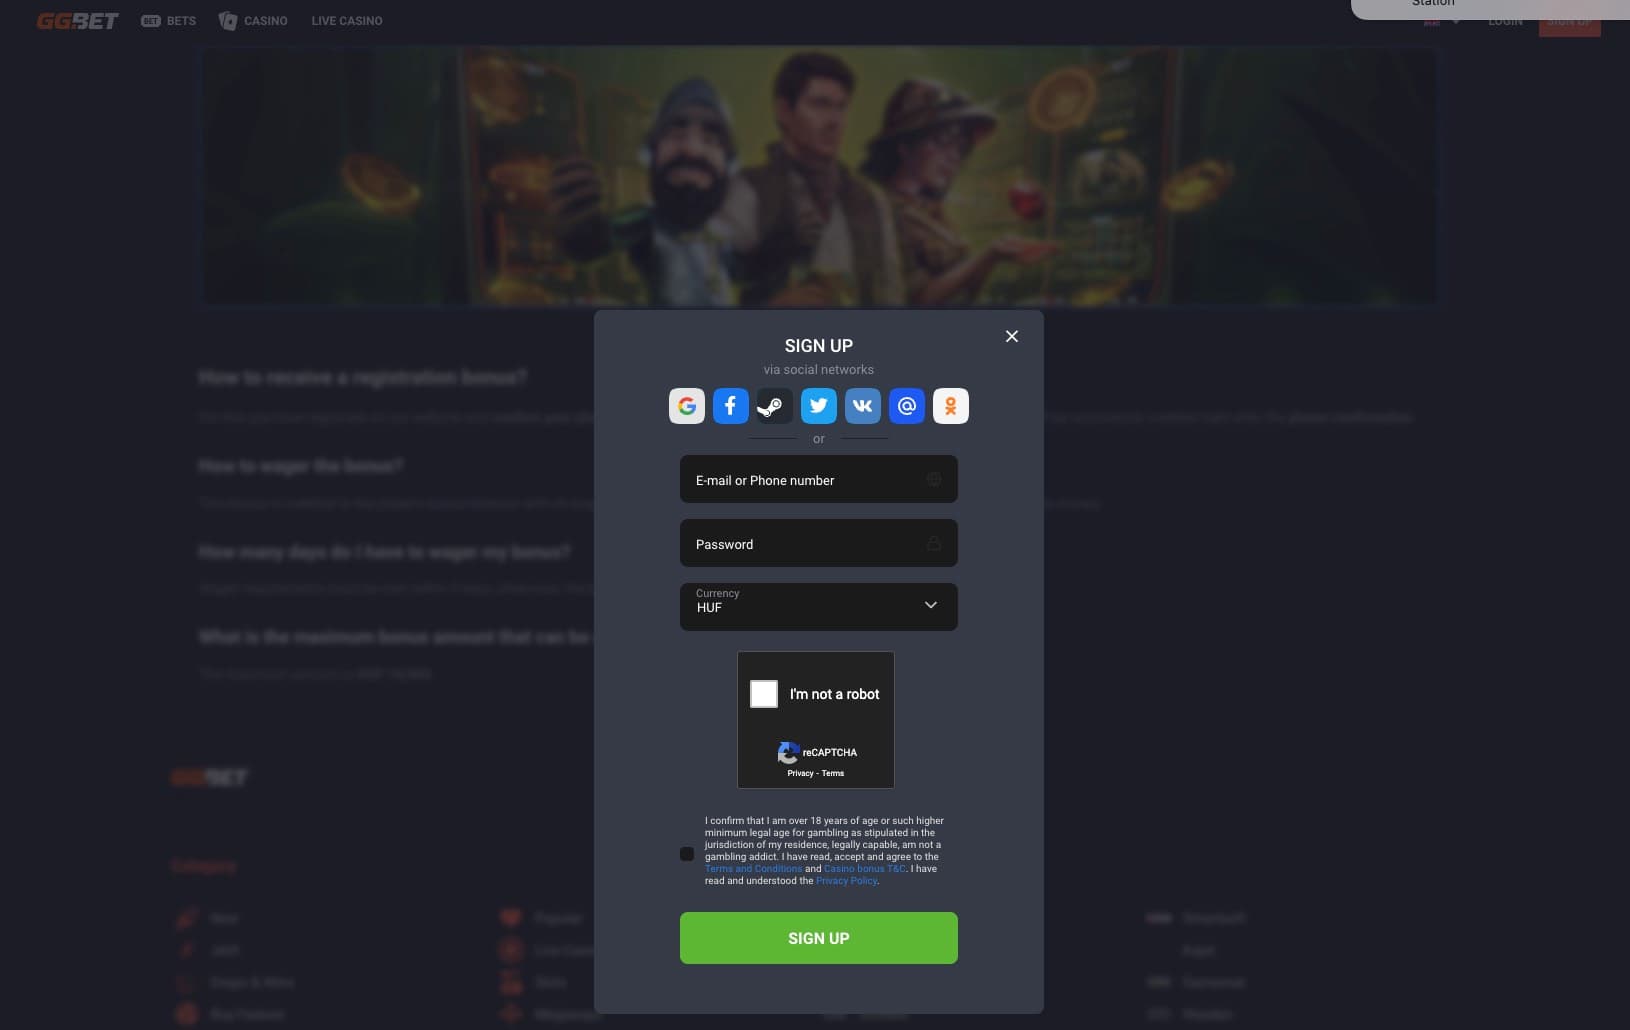 Registration page at GGBet Casino